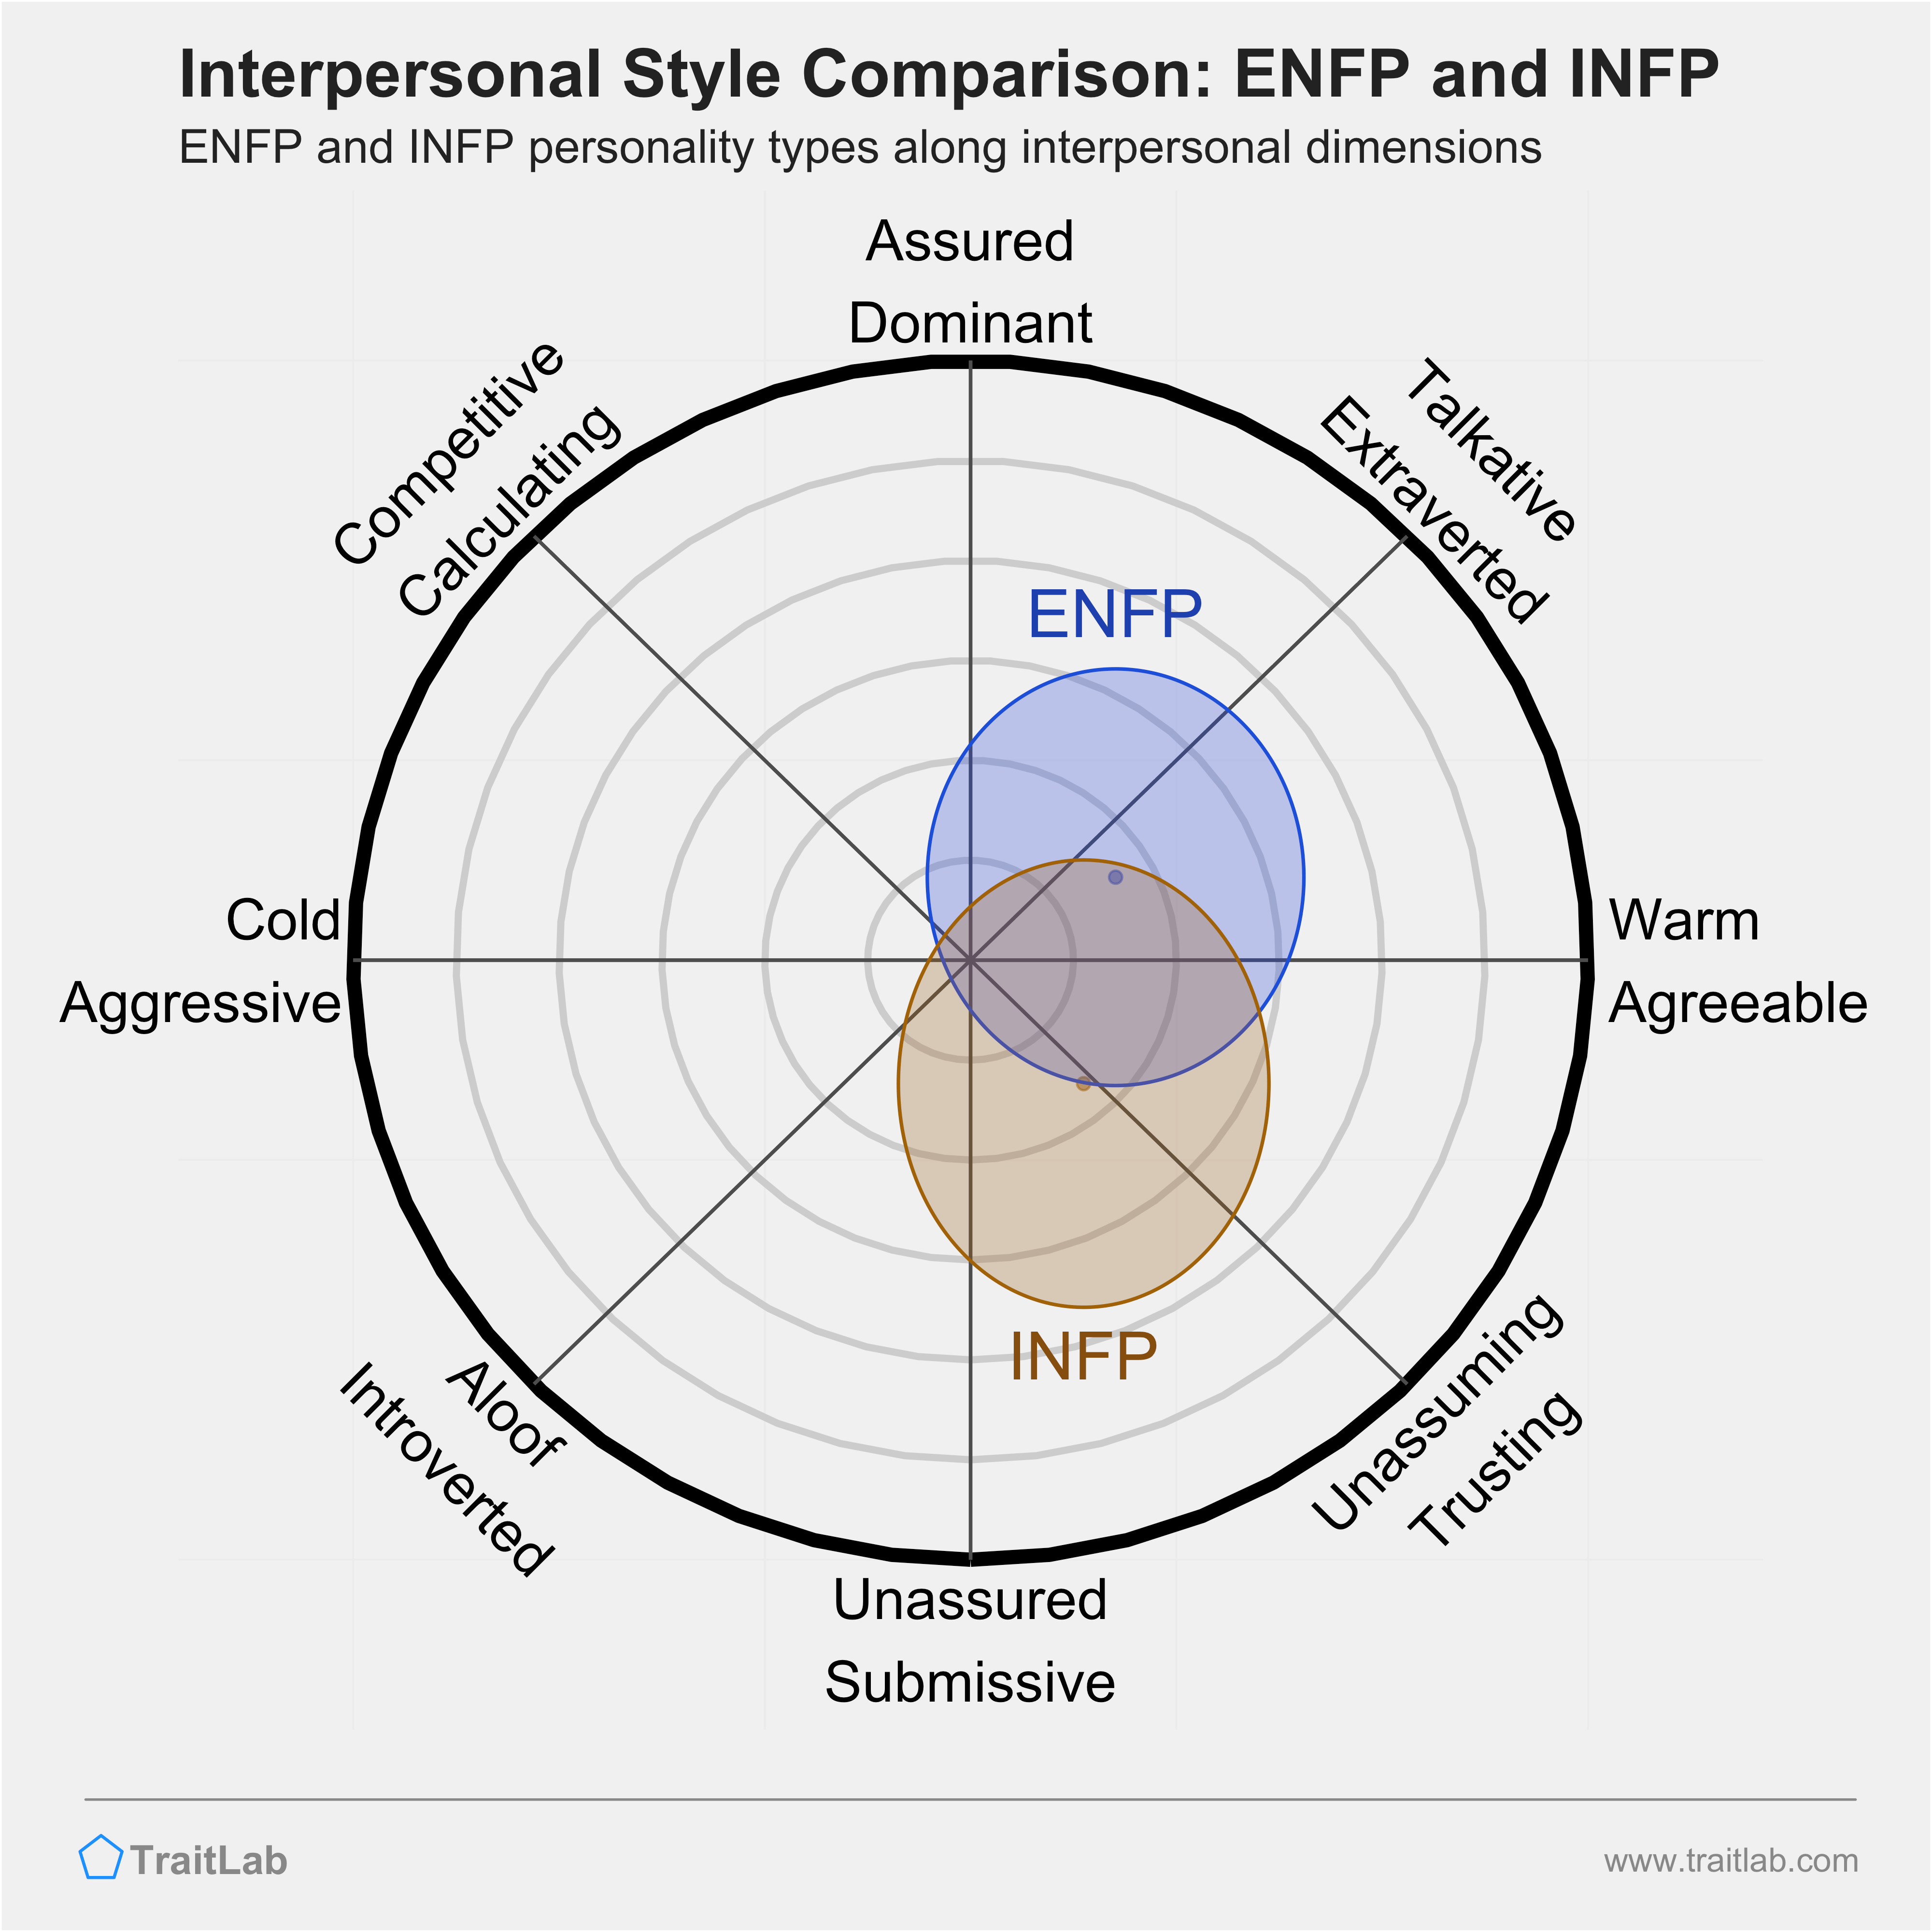 ENFP and INFP comparison across interpersonal dimensions